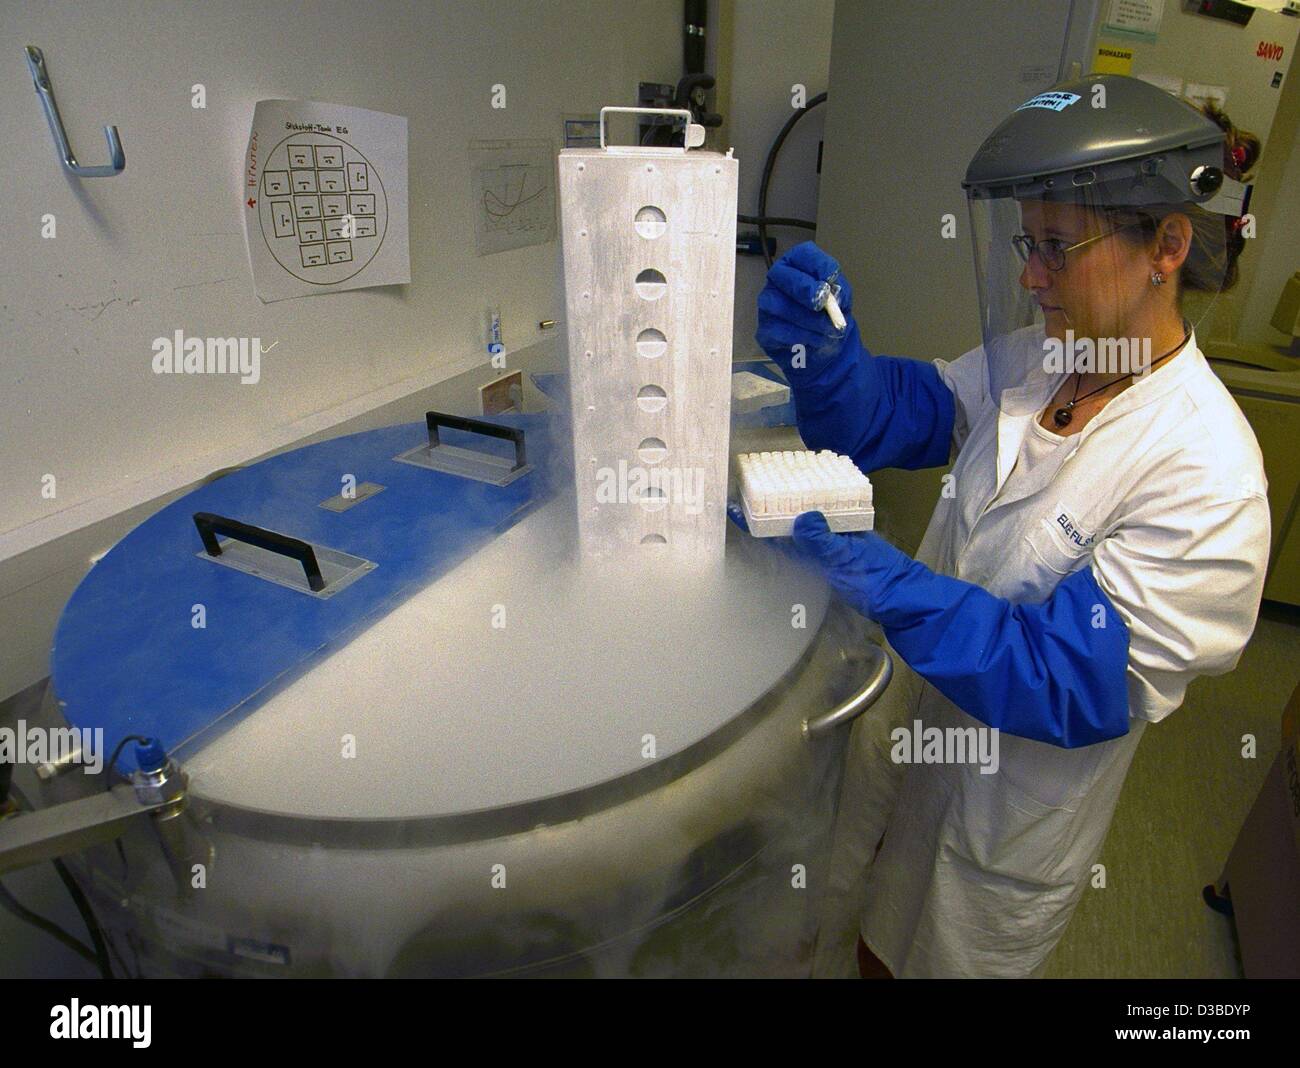 (dpa) - In a tank with liquid nitrogen at -196 degrees Celsius, samples await their treatment in the gene laboratory of the company Medigene AG in Martinsried near Munich, 16 January 2003. Since it was founded in 1994, the future-oriented company Medigene has been one of the leading biotechnological Stock Photo